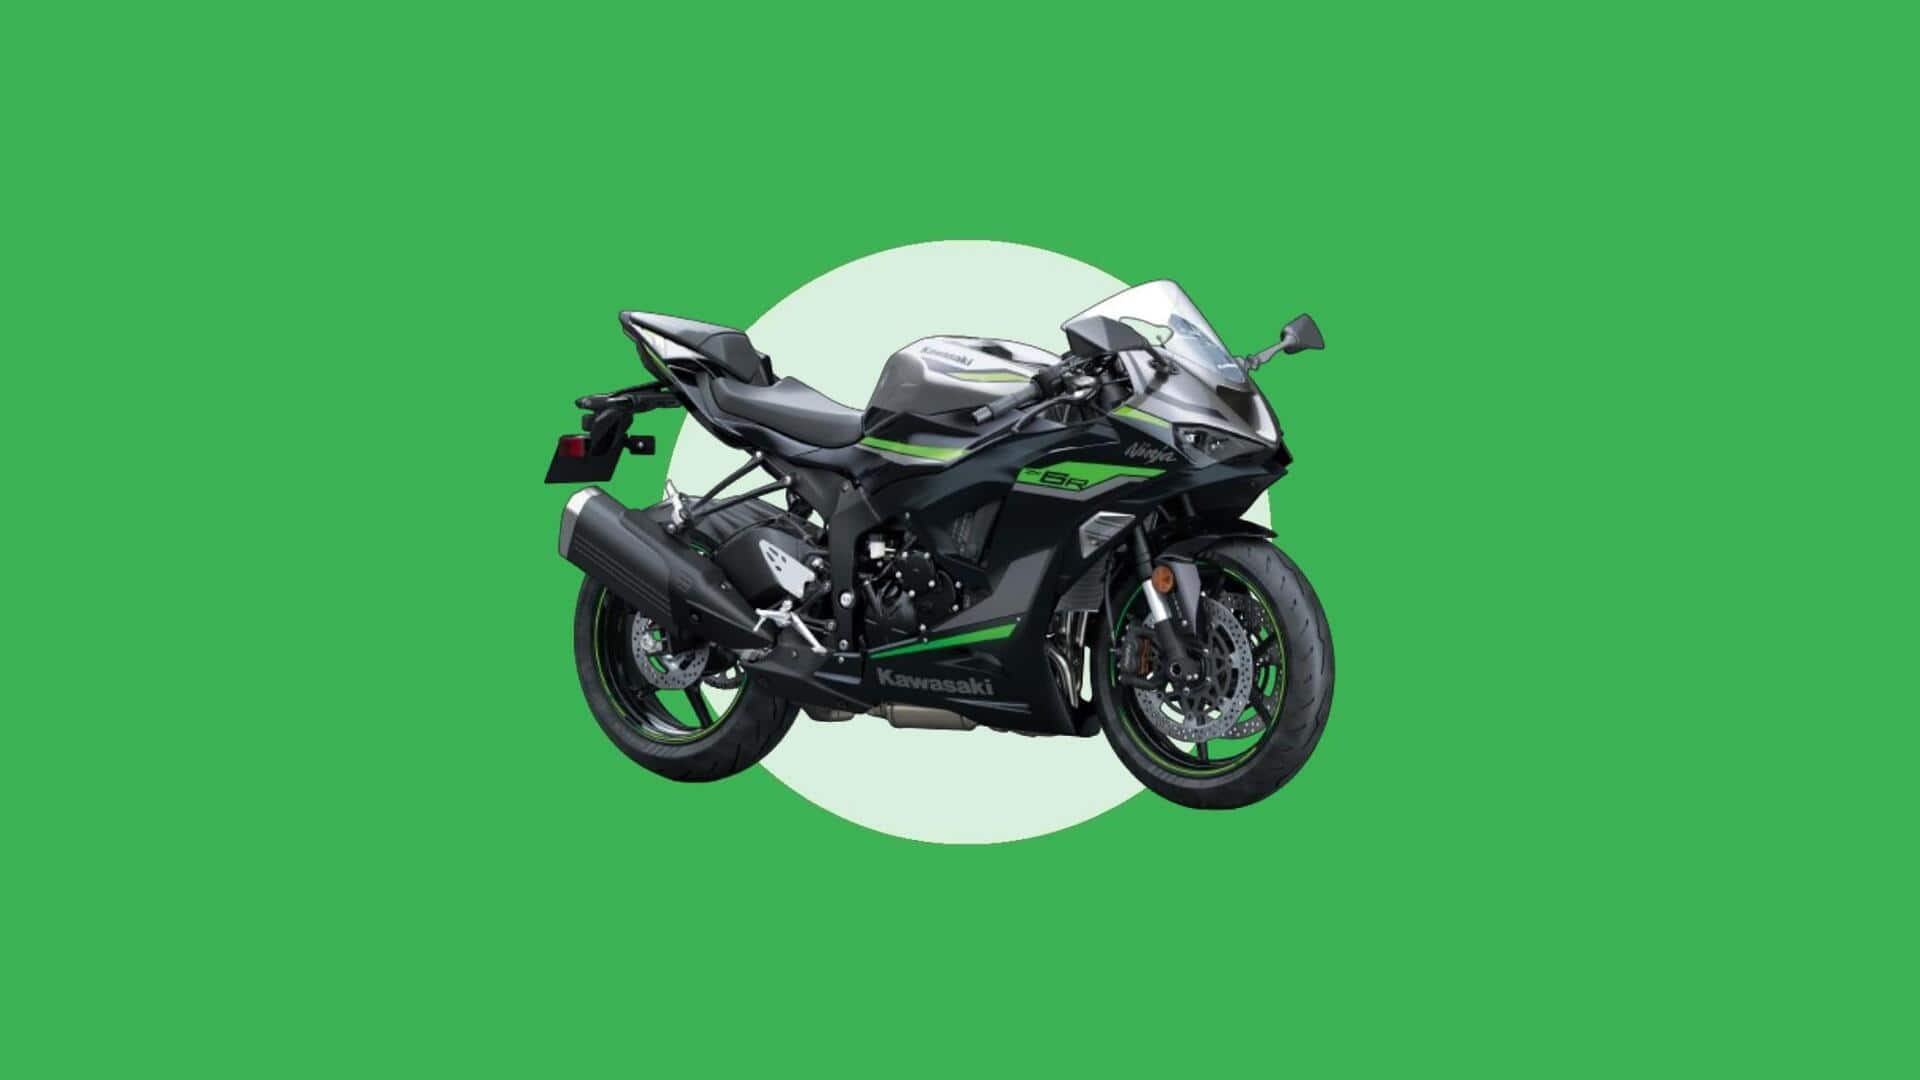 Kawasaki announces attractive offers on select motorcycles this January